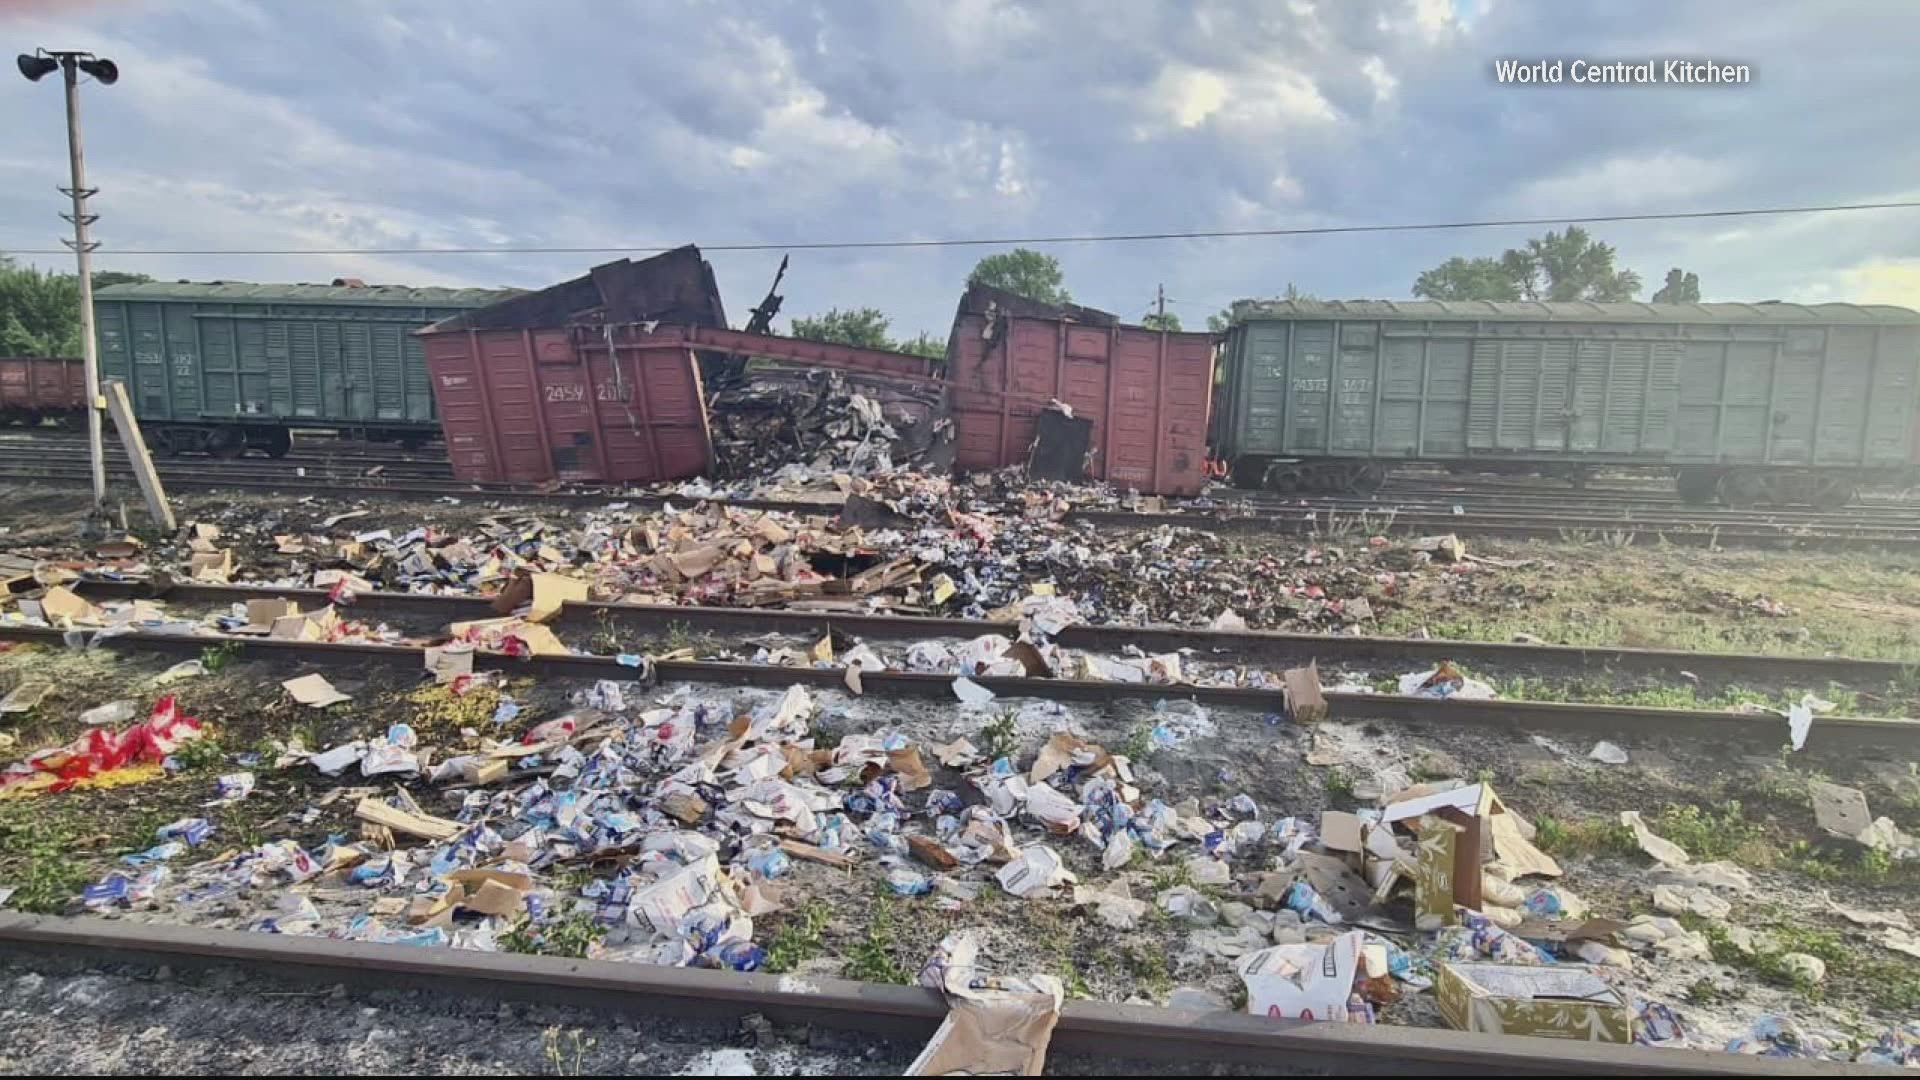 The missile destroyed a train full of food meant for front-line families in eastern Ukraine.